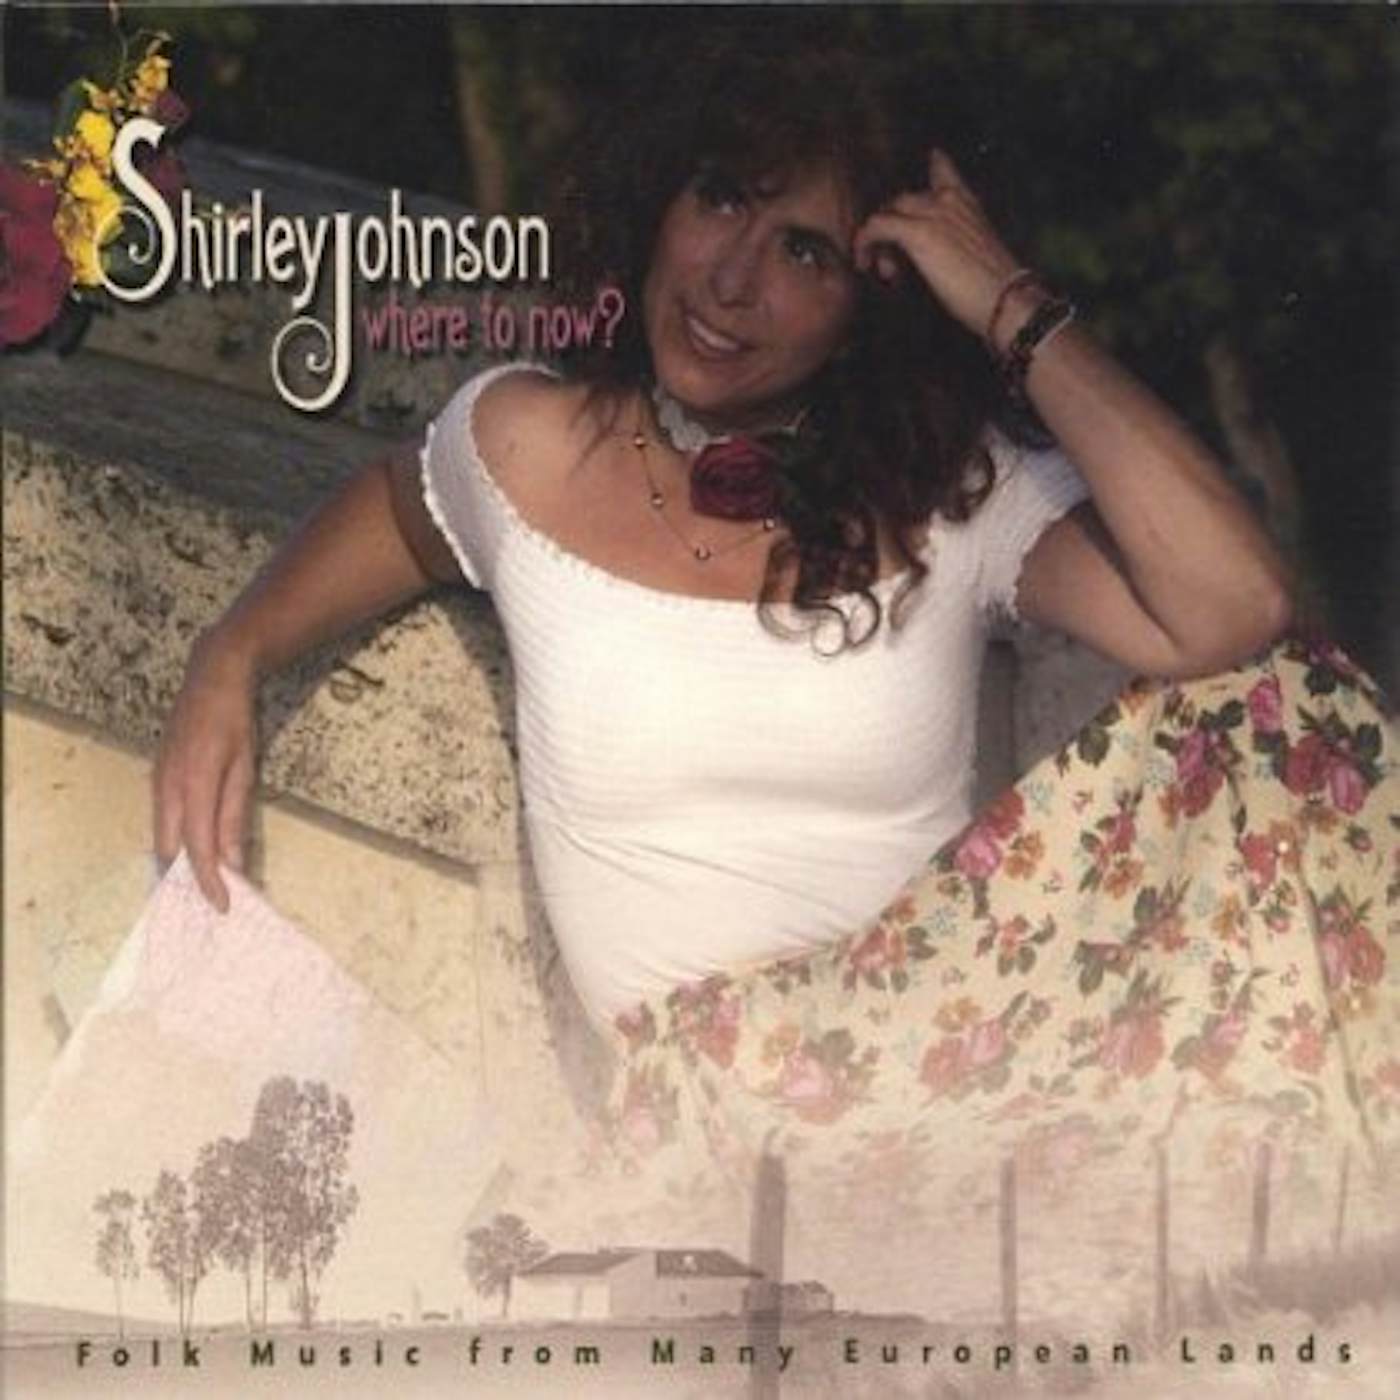 Shirley Johnson WHERE TO NOW? FOLK MUSIC FROM MANY EUROPEAN LANDS CD